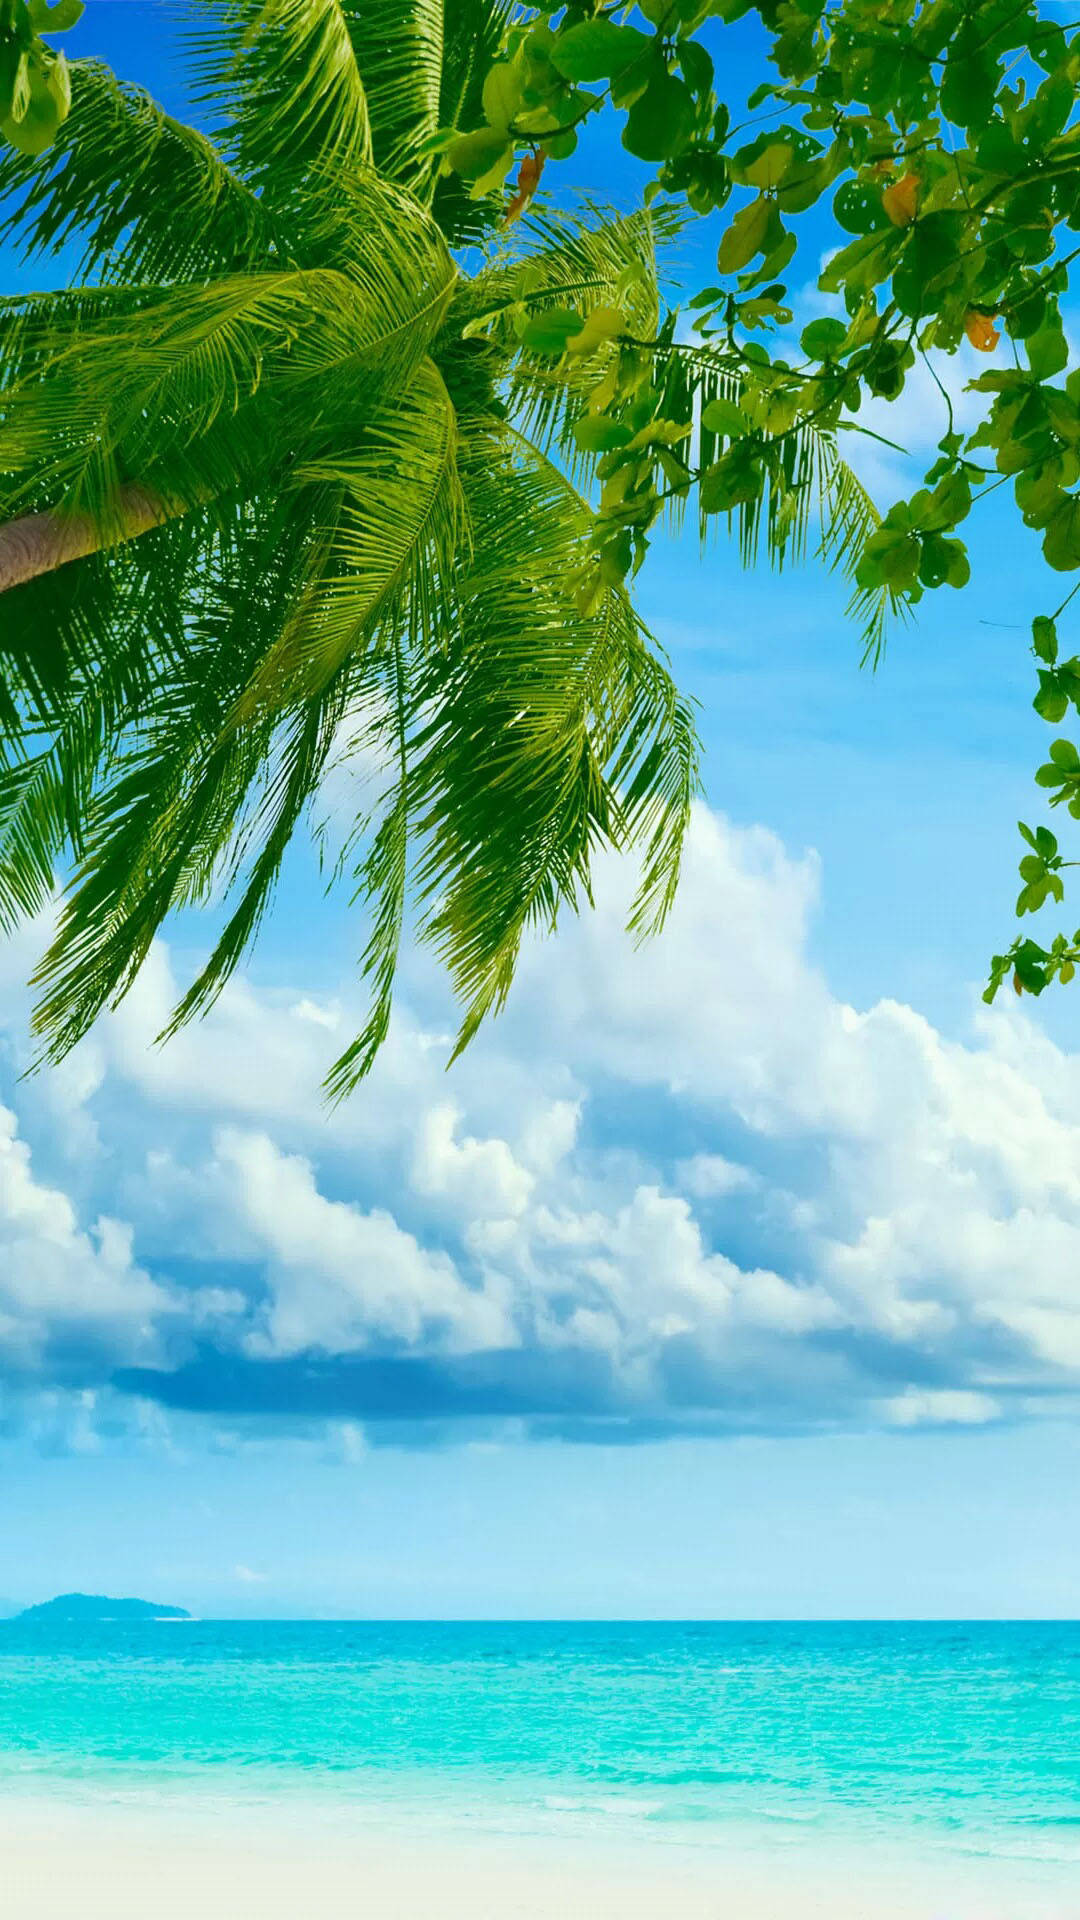 Beach Scenery With Coconut Tree Wallpaper